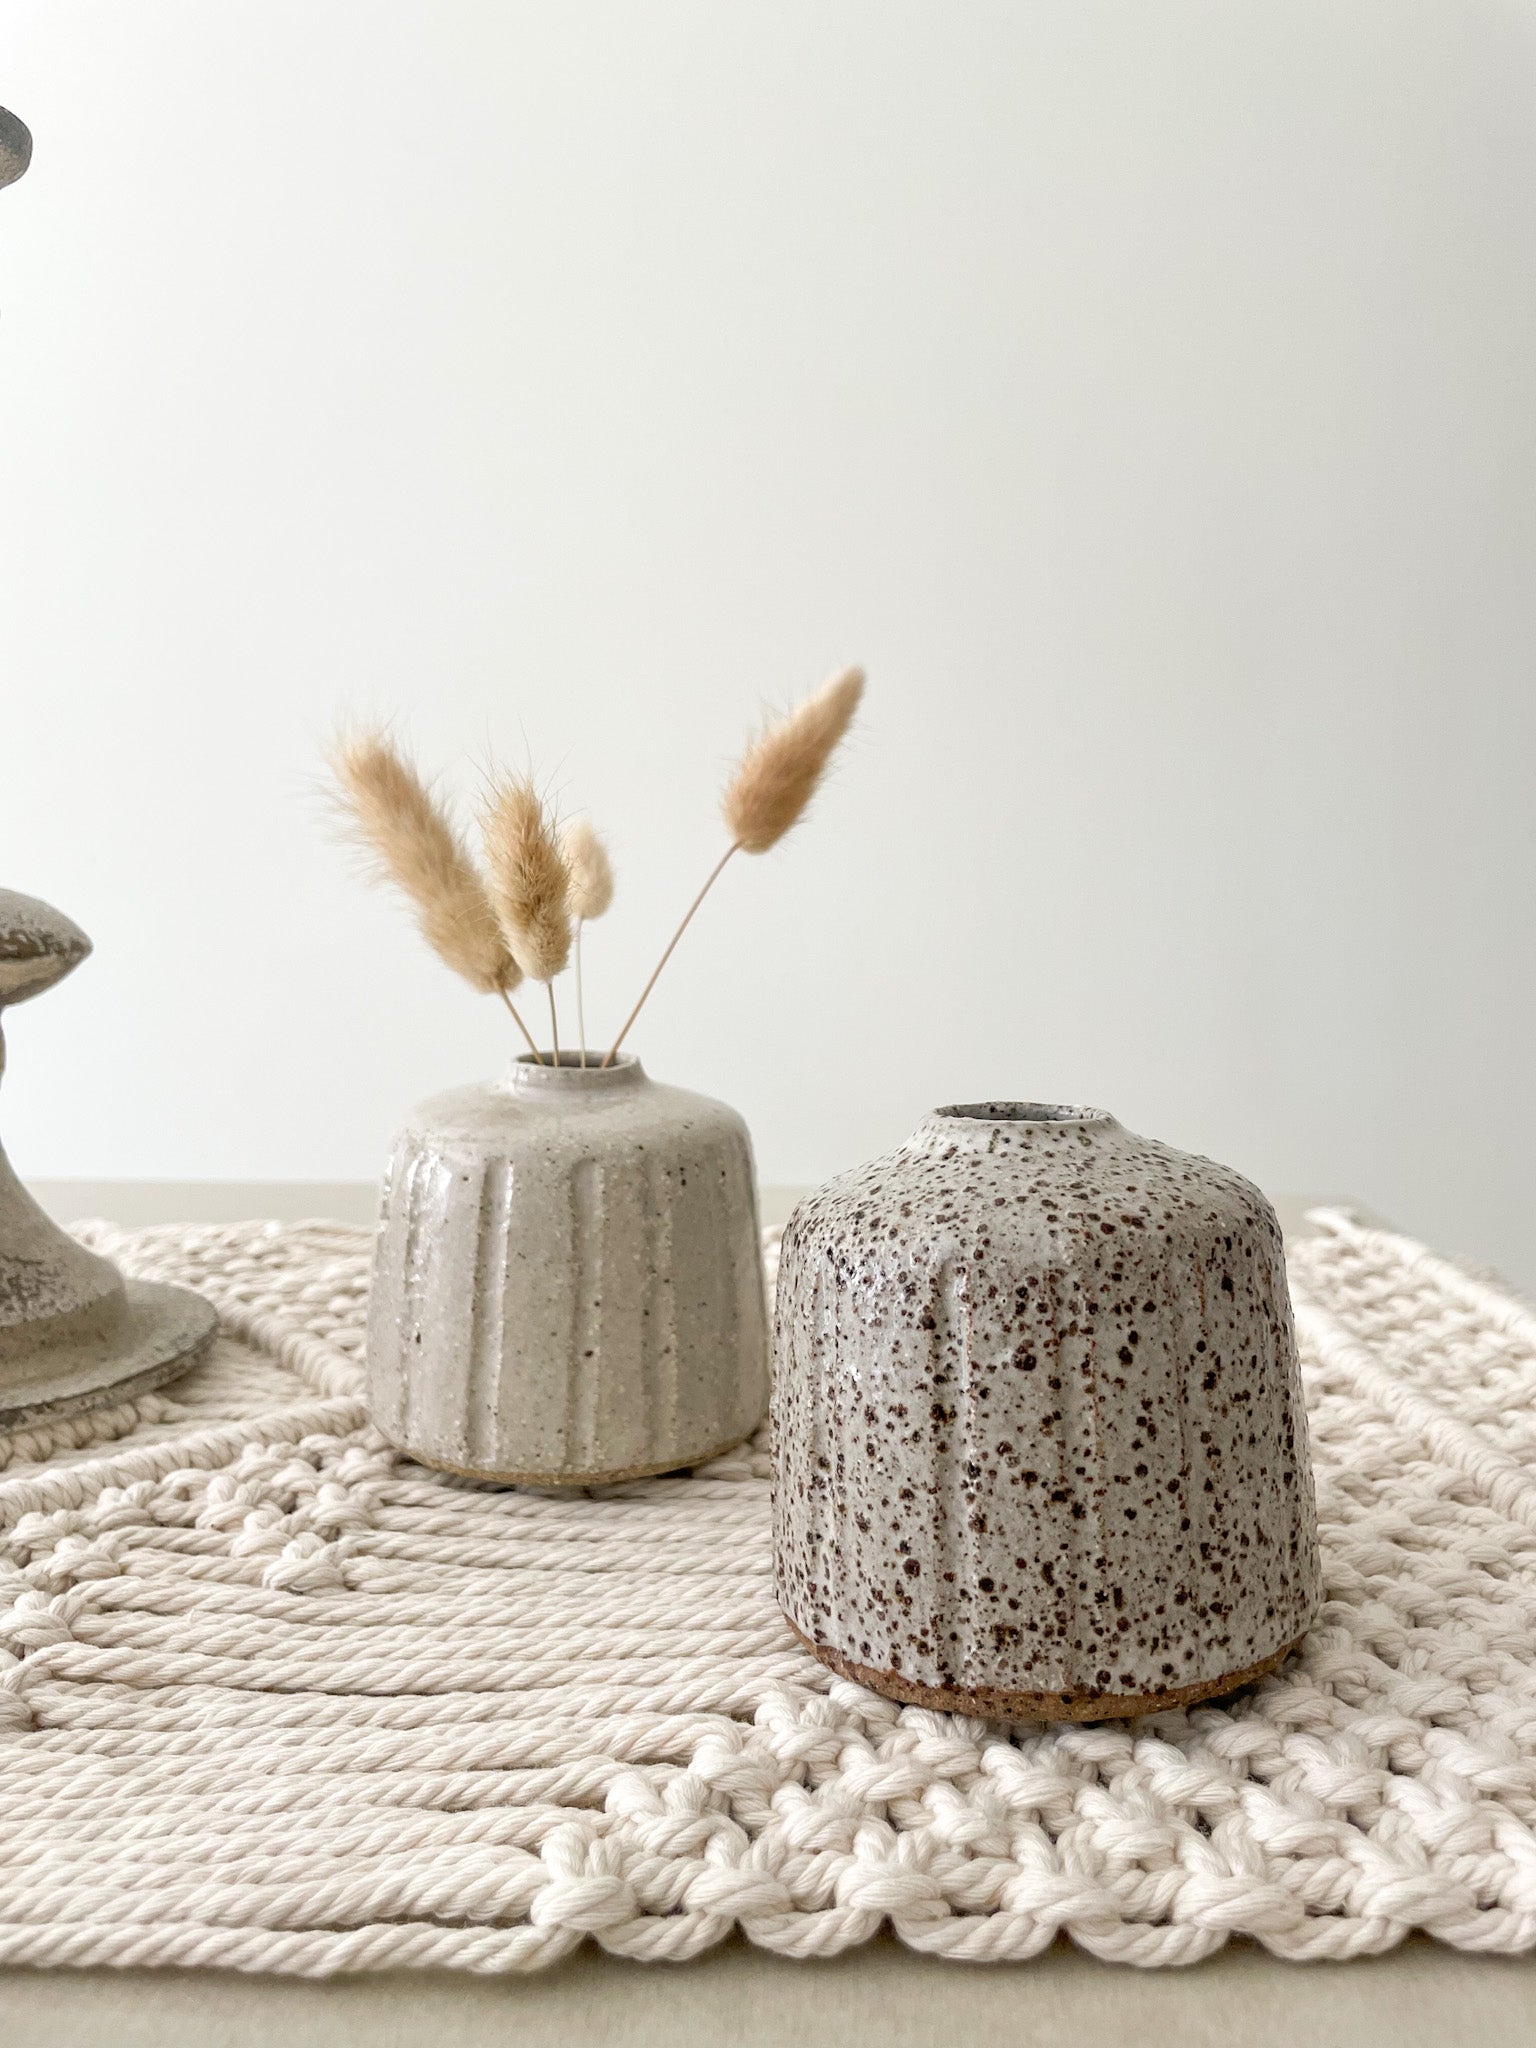 Two small ceramic vases displayed on a macrame table runner and styled with dried flowers